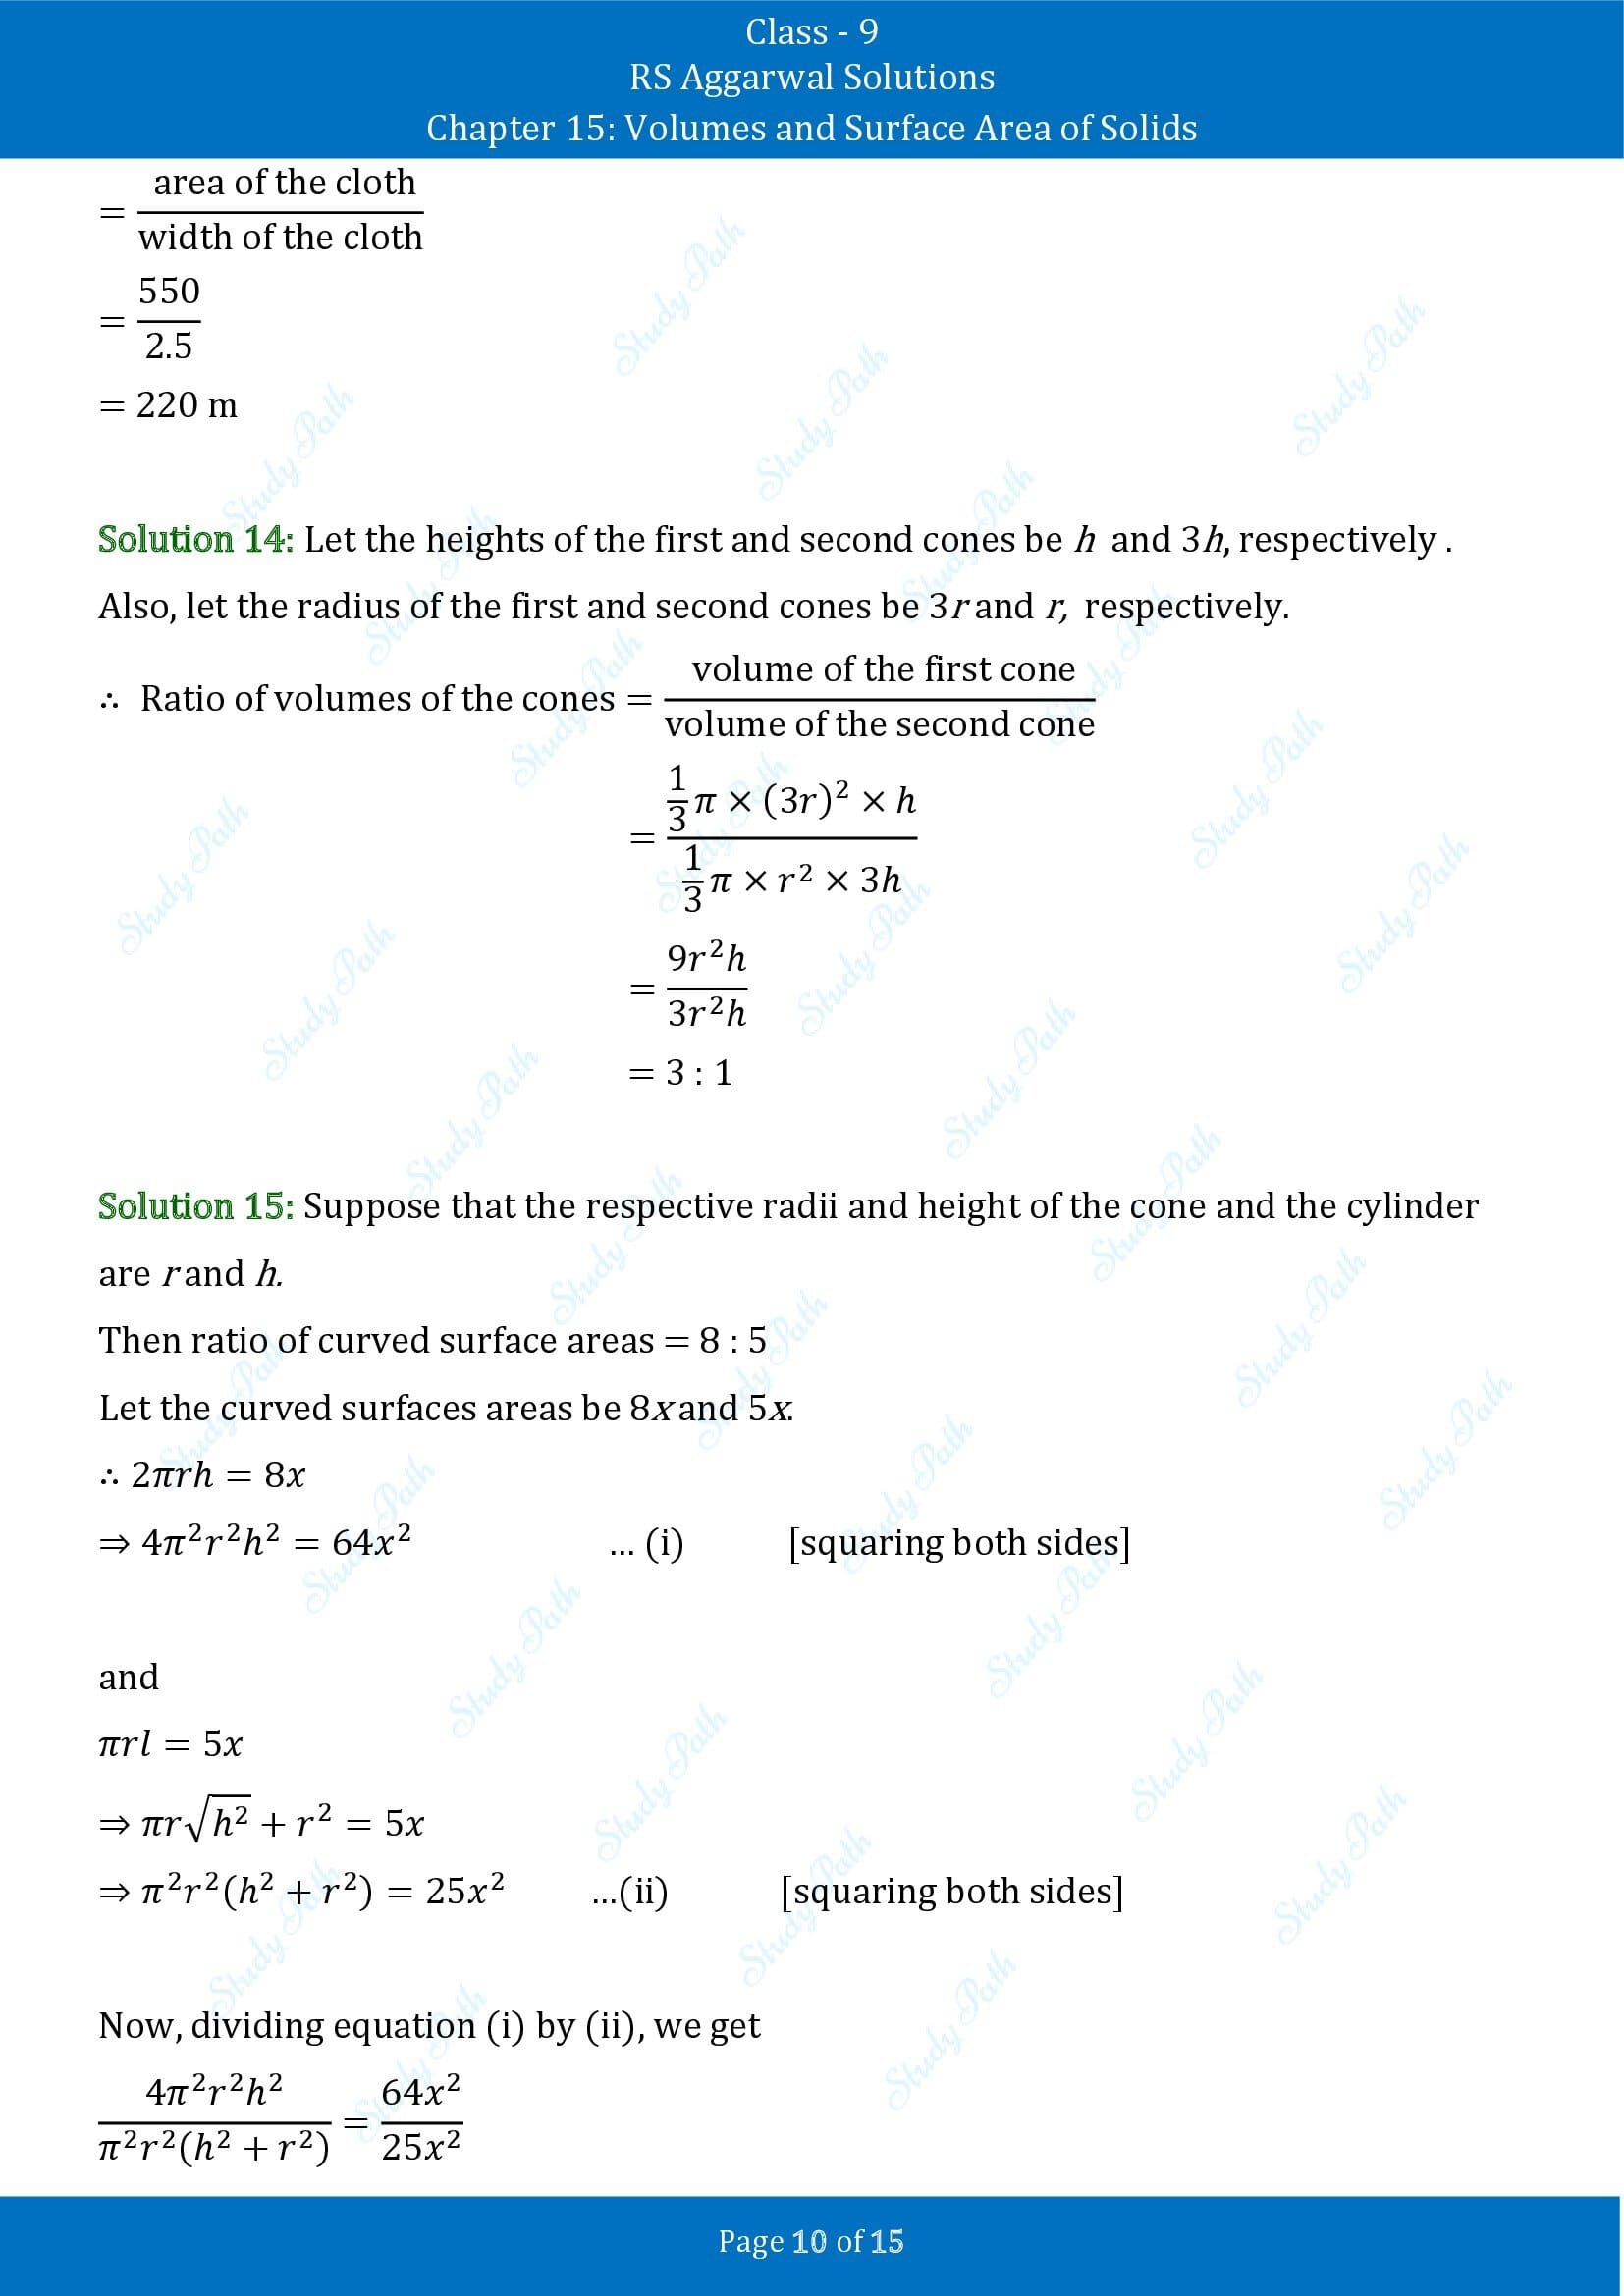 RS Aggarwal Solutions Class 9 Chapter 15 Volumes and Surface Area of Solids Exercise 15C 00010